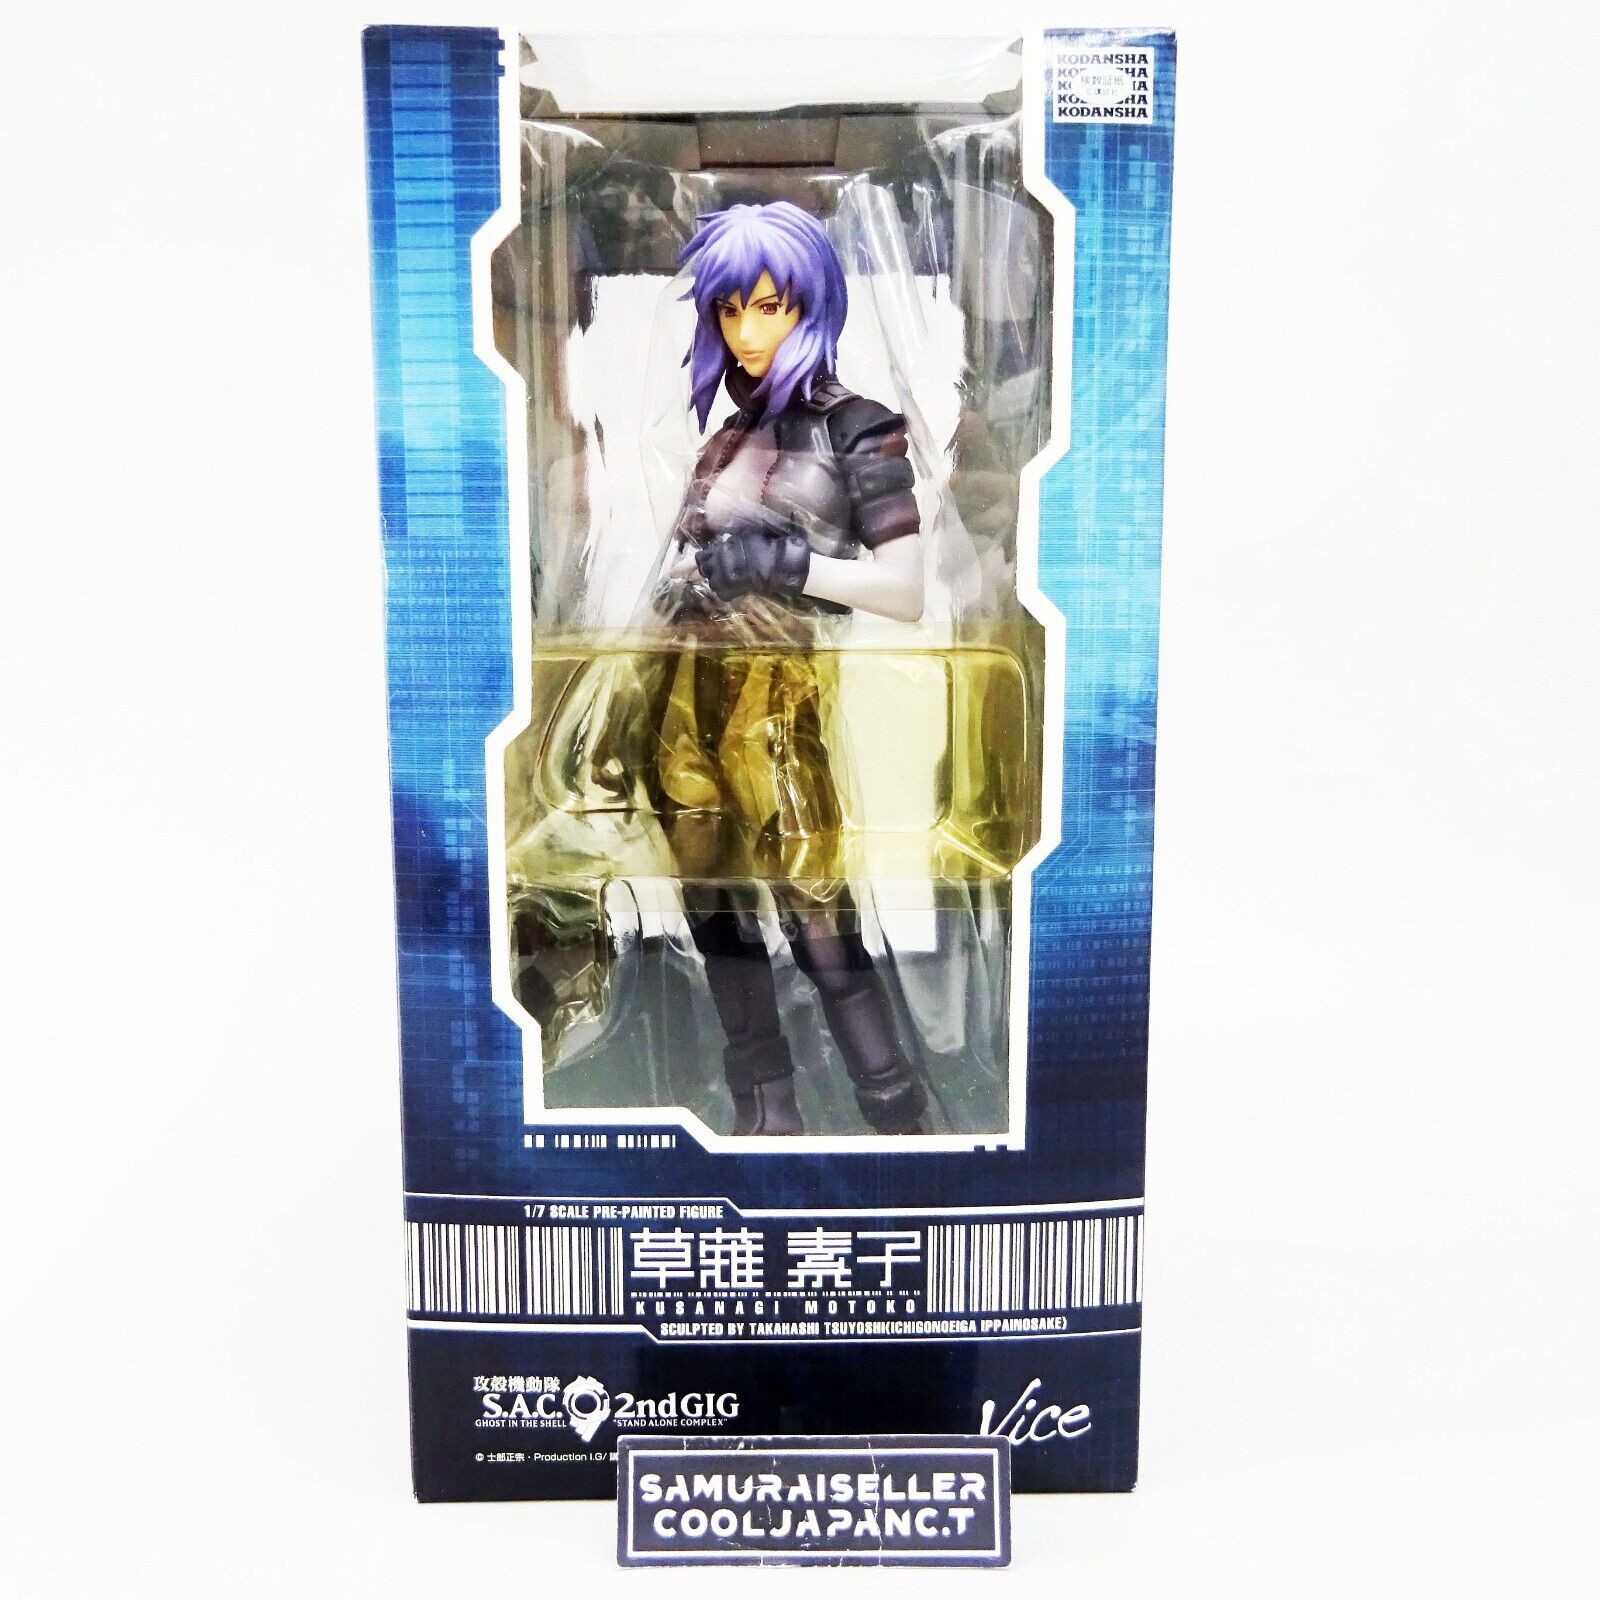 Ghost in the Shell S.A.C. 2nd GIG Motoko Kusanagi 1/7 Scale PVC Figure Japan NEW